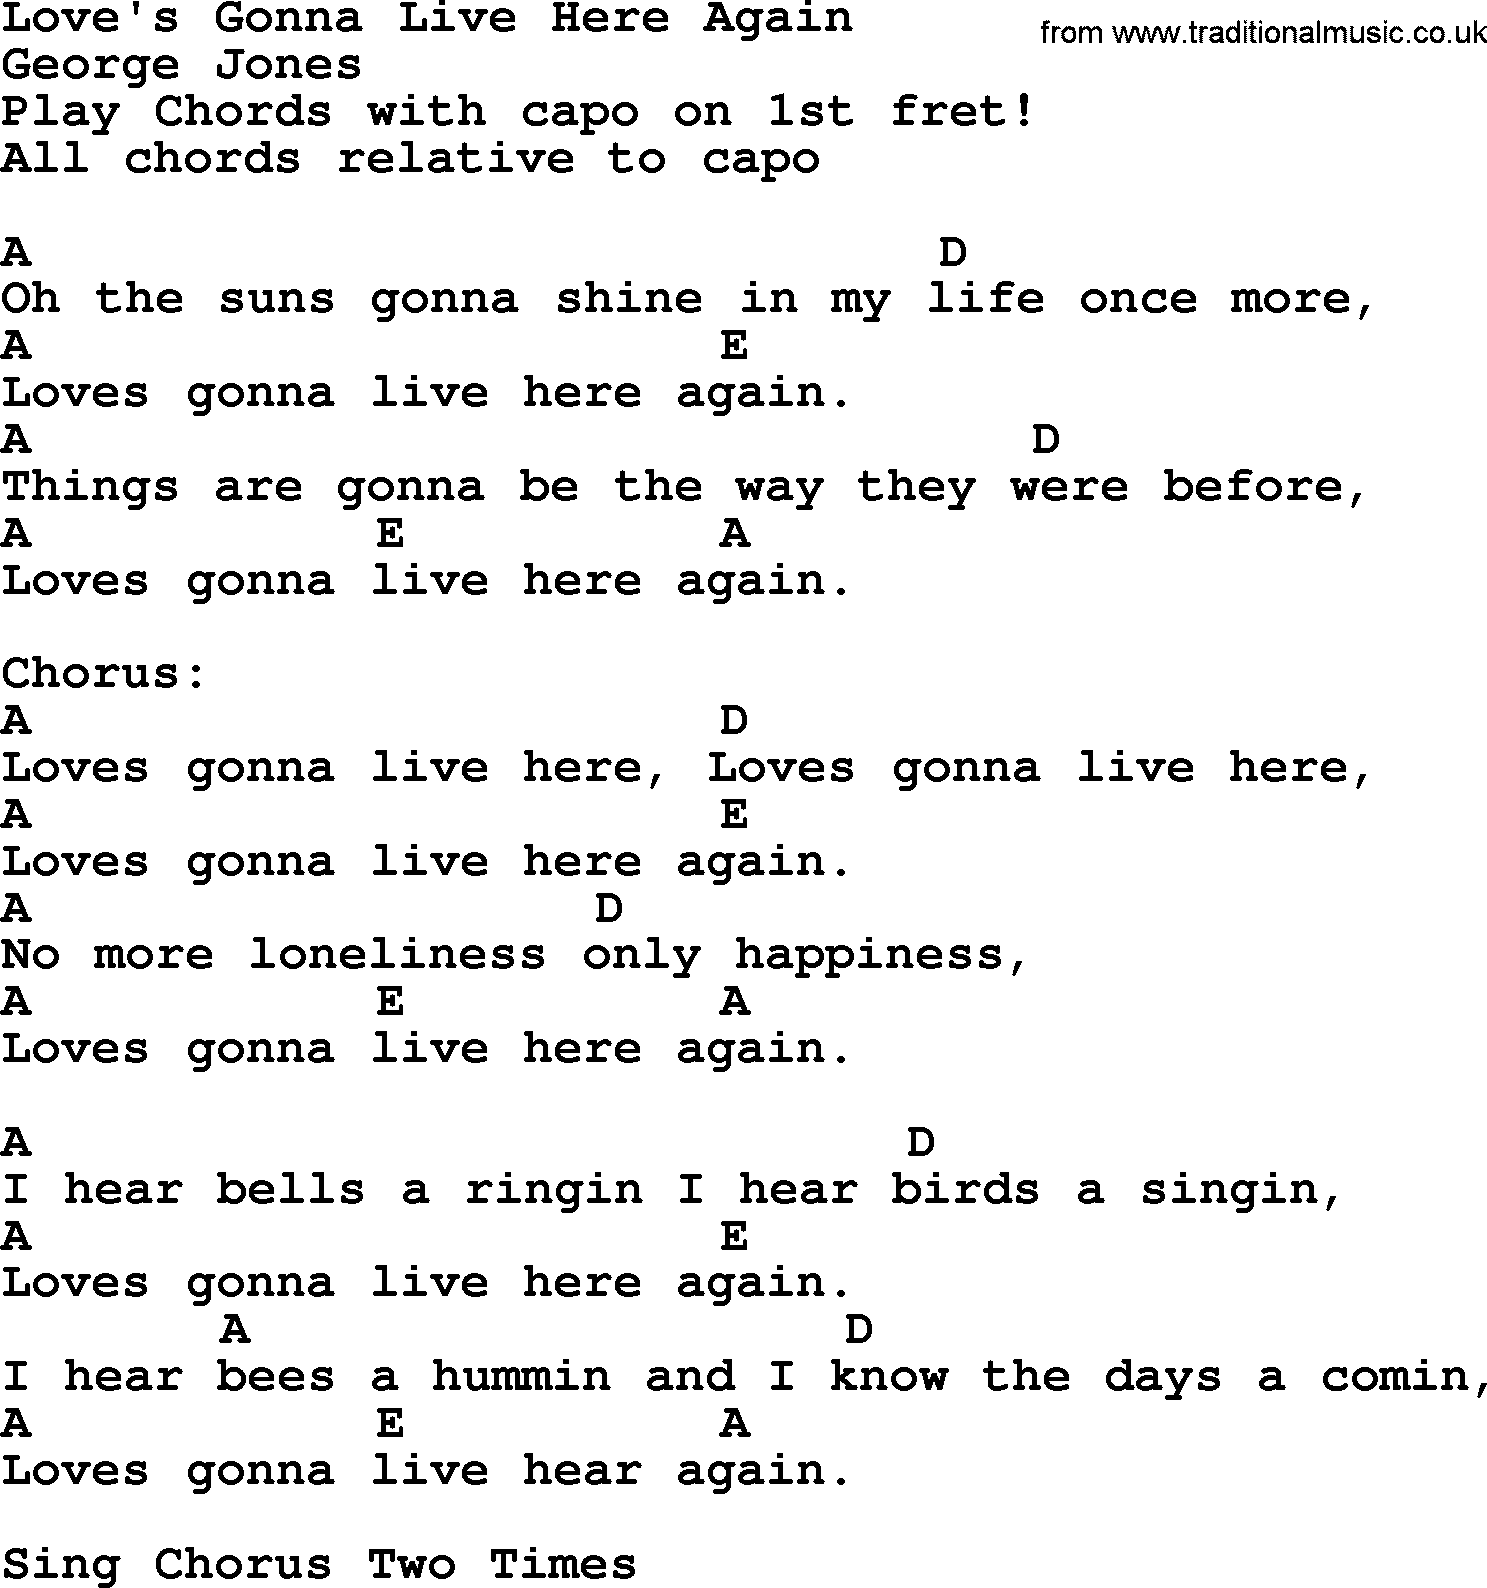 George Jones song: Love's Gonna Live Here Again, lyrics and chords